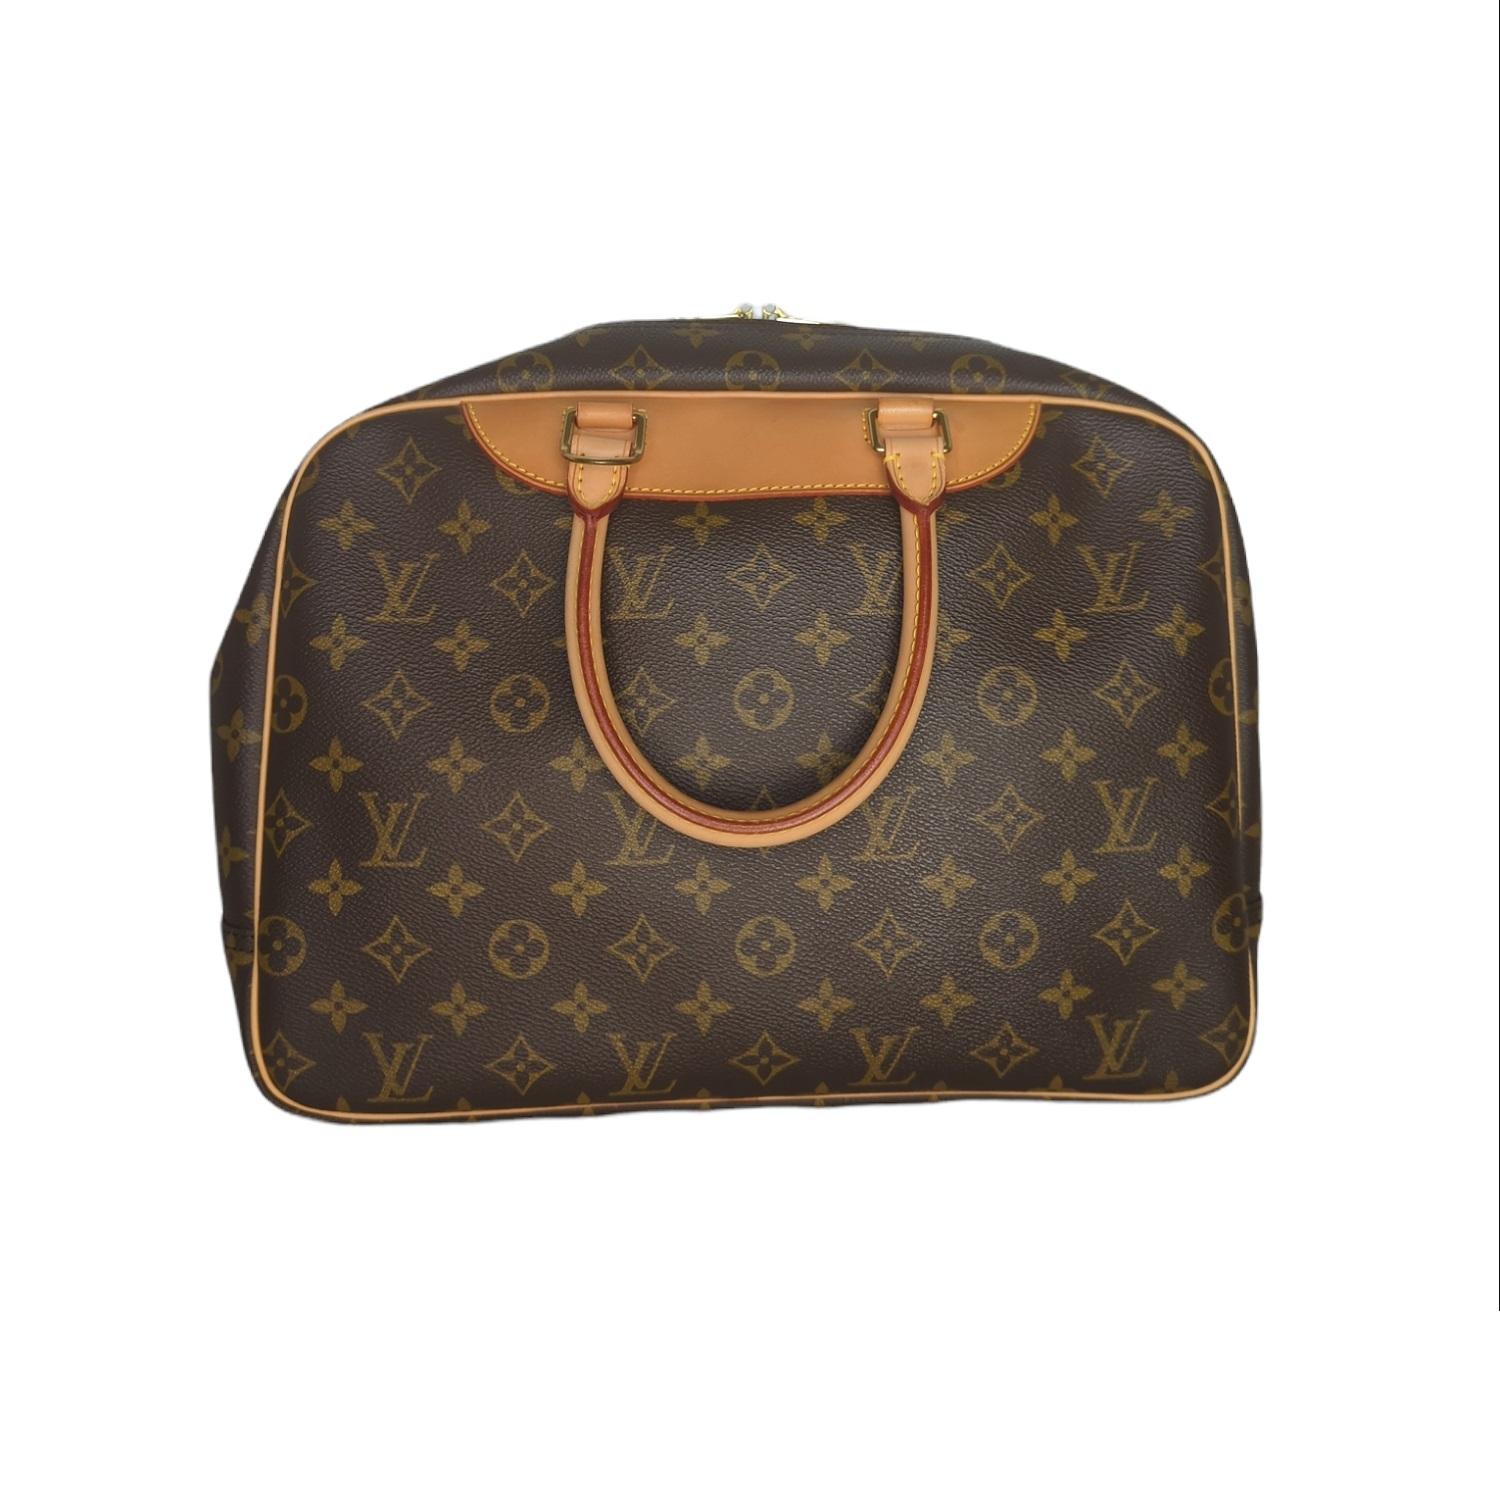 This Louis Vuitton Monogram Deauville Canvas Bowling bag, is crafted from brown and tan monogram coated canvas, features dual rolled top handles, cowhide leather trim, and brass hardware. Its two-way zip-around closure opens to a beige canvas lining